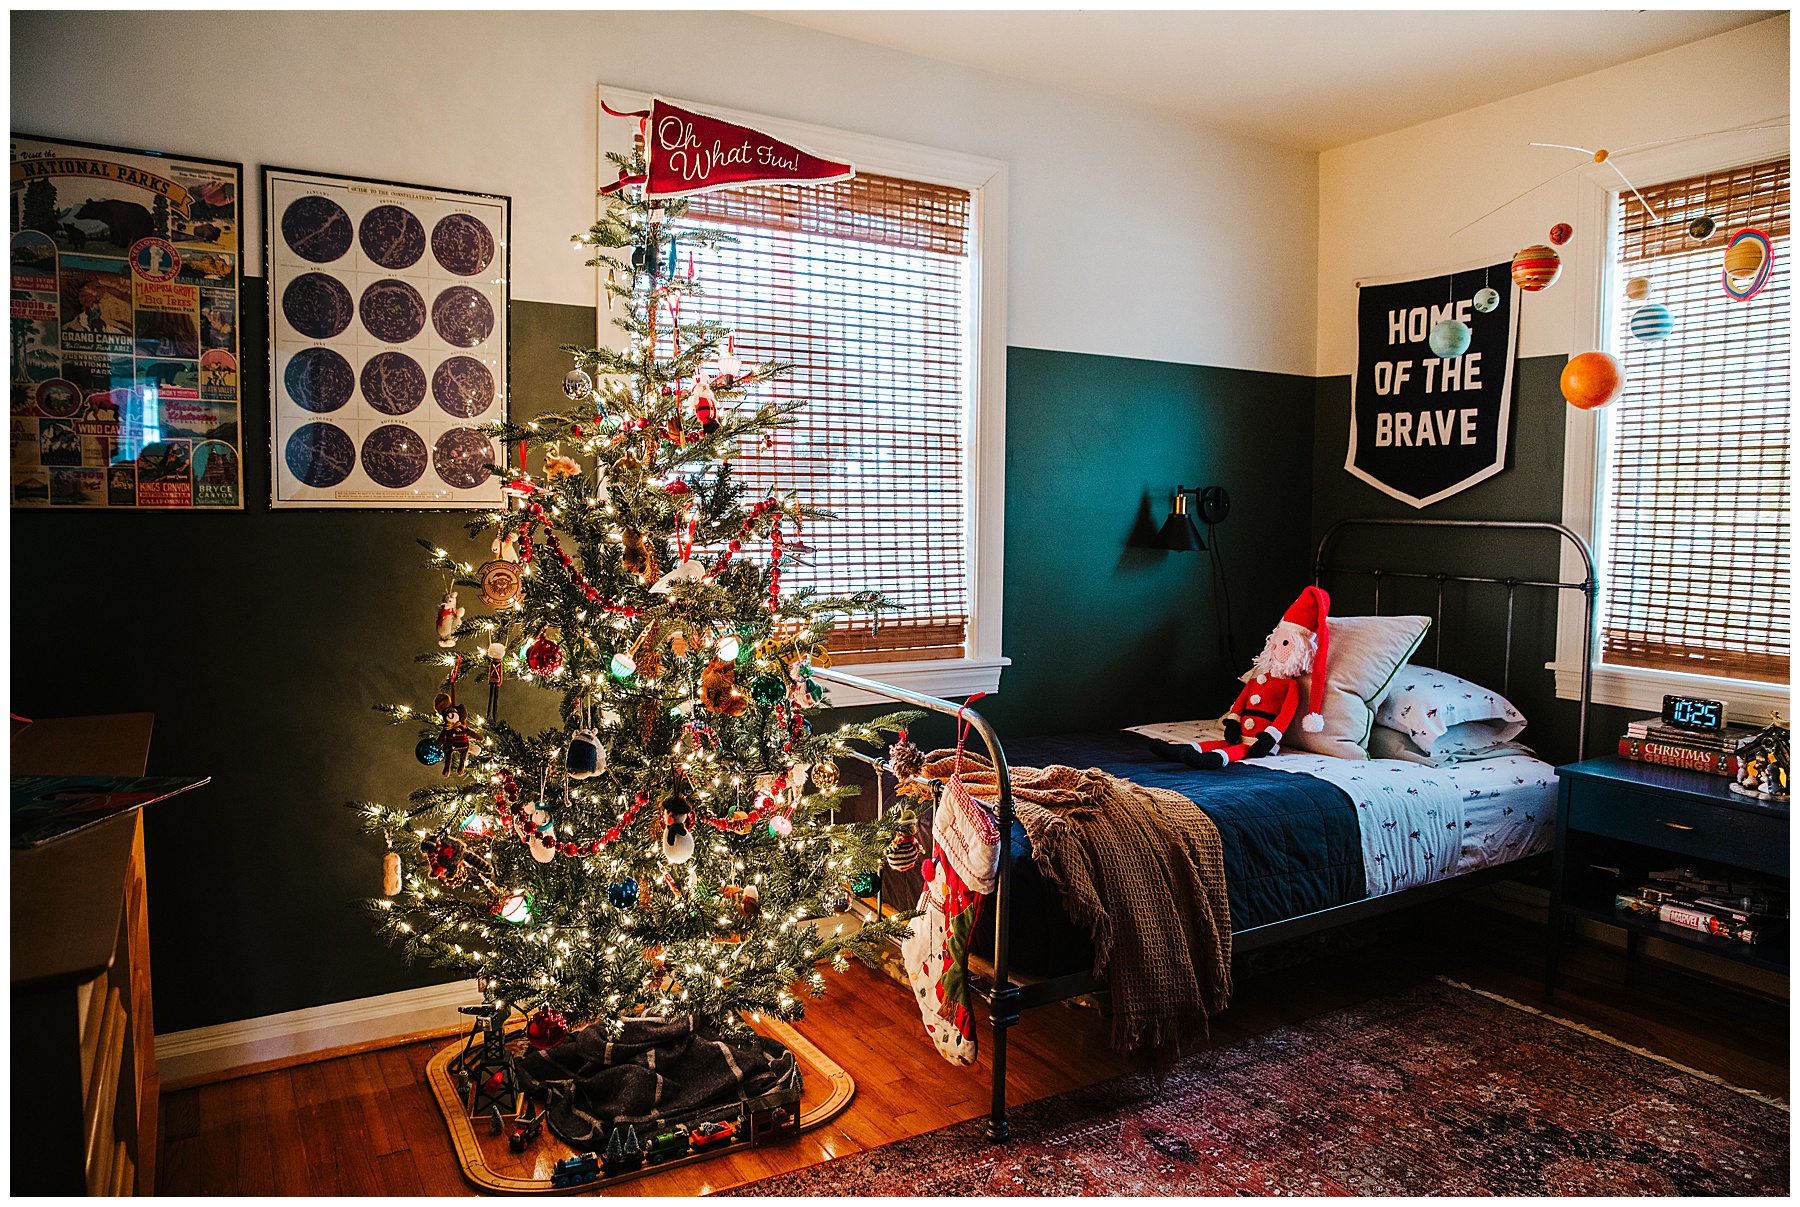 Boys Christmas bedroom showing a 6.5 foot tree at the foot of his bed.